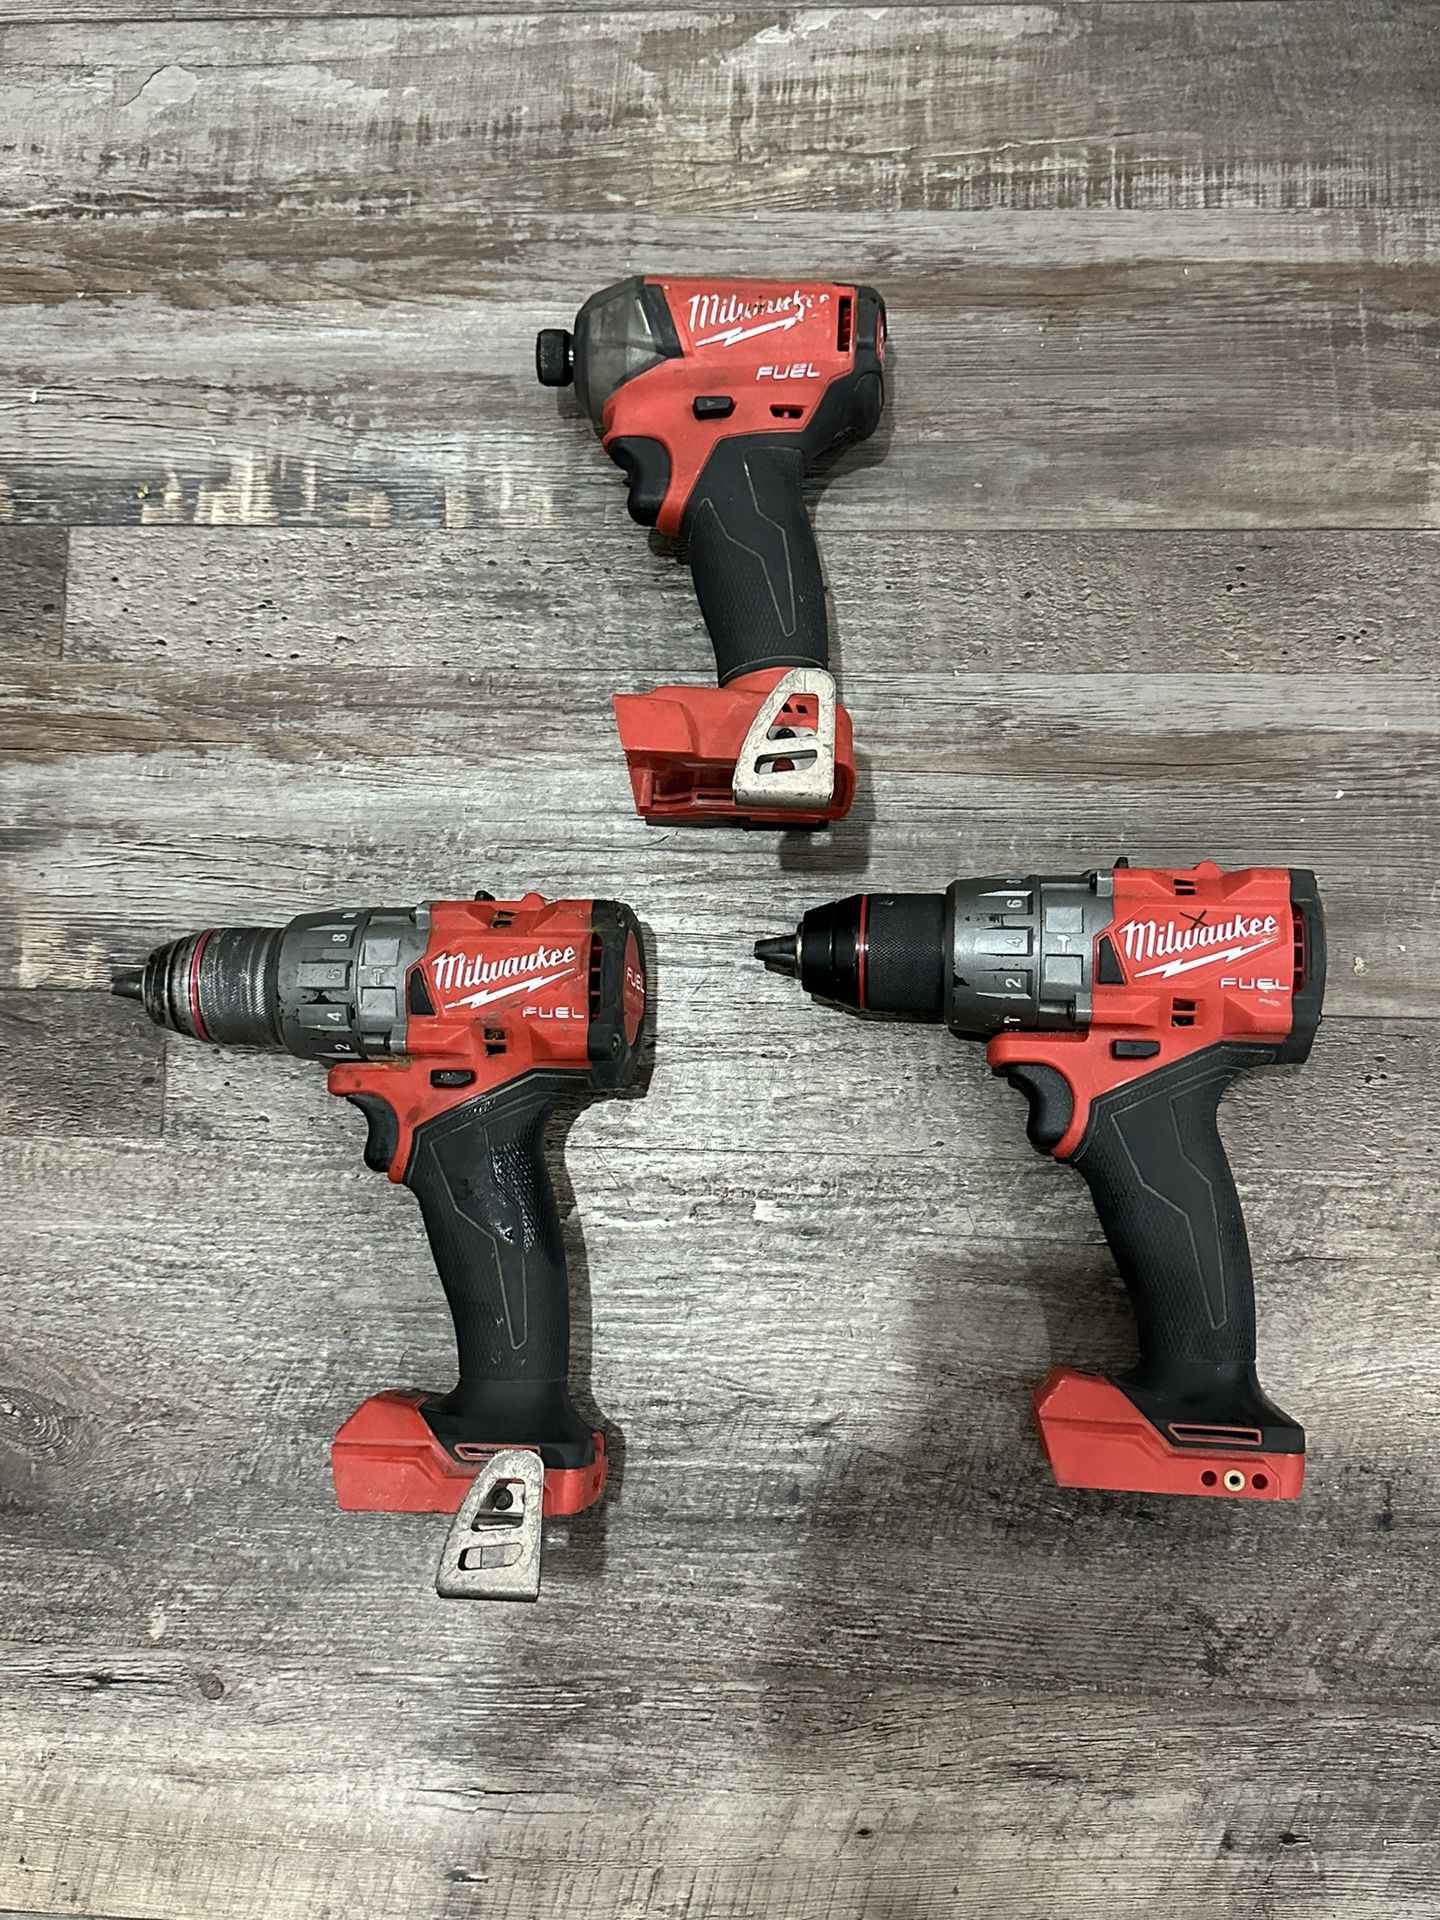 2 Hammer drill Fuel a Impact Surge Fuel ( each ) Firm price 